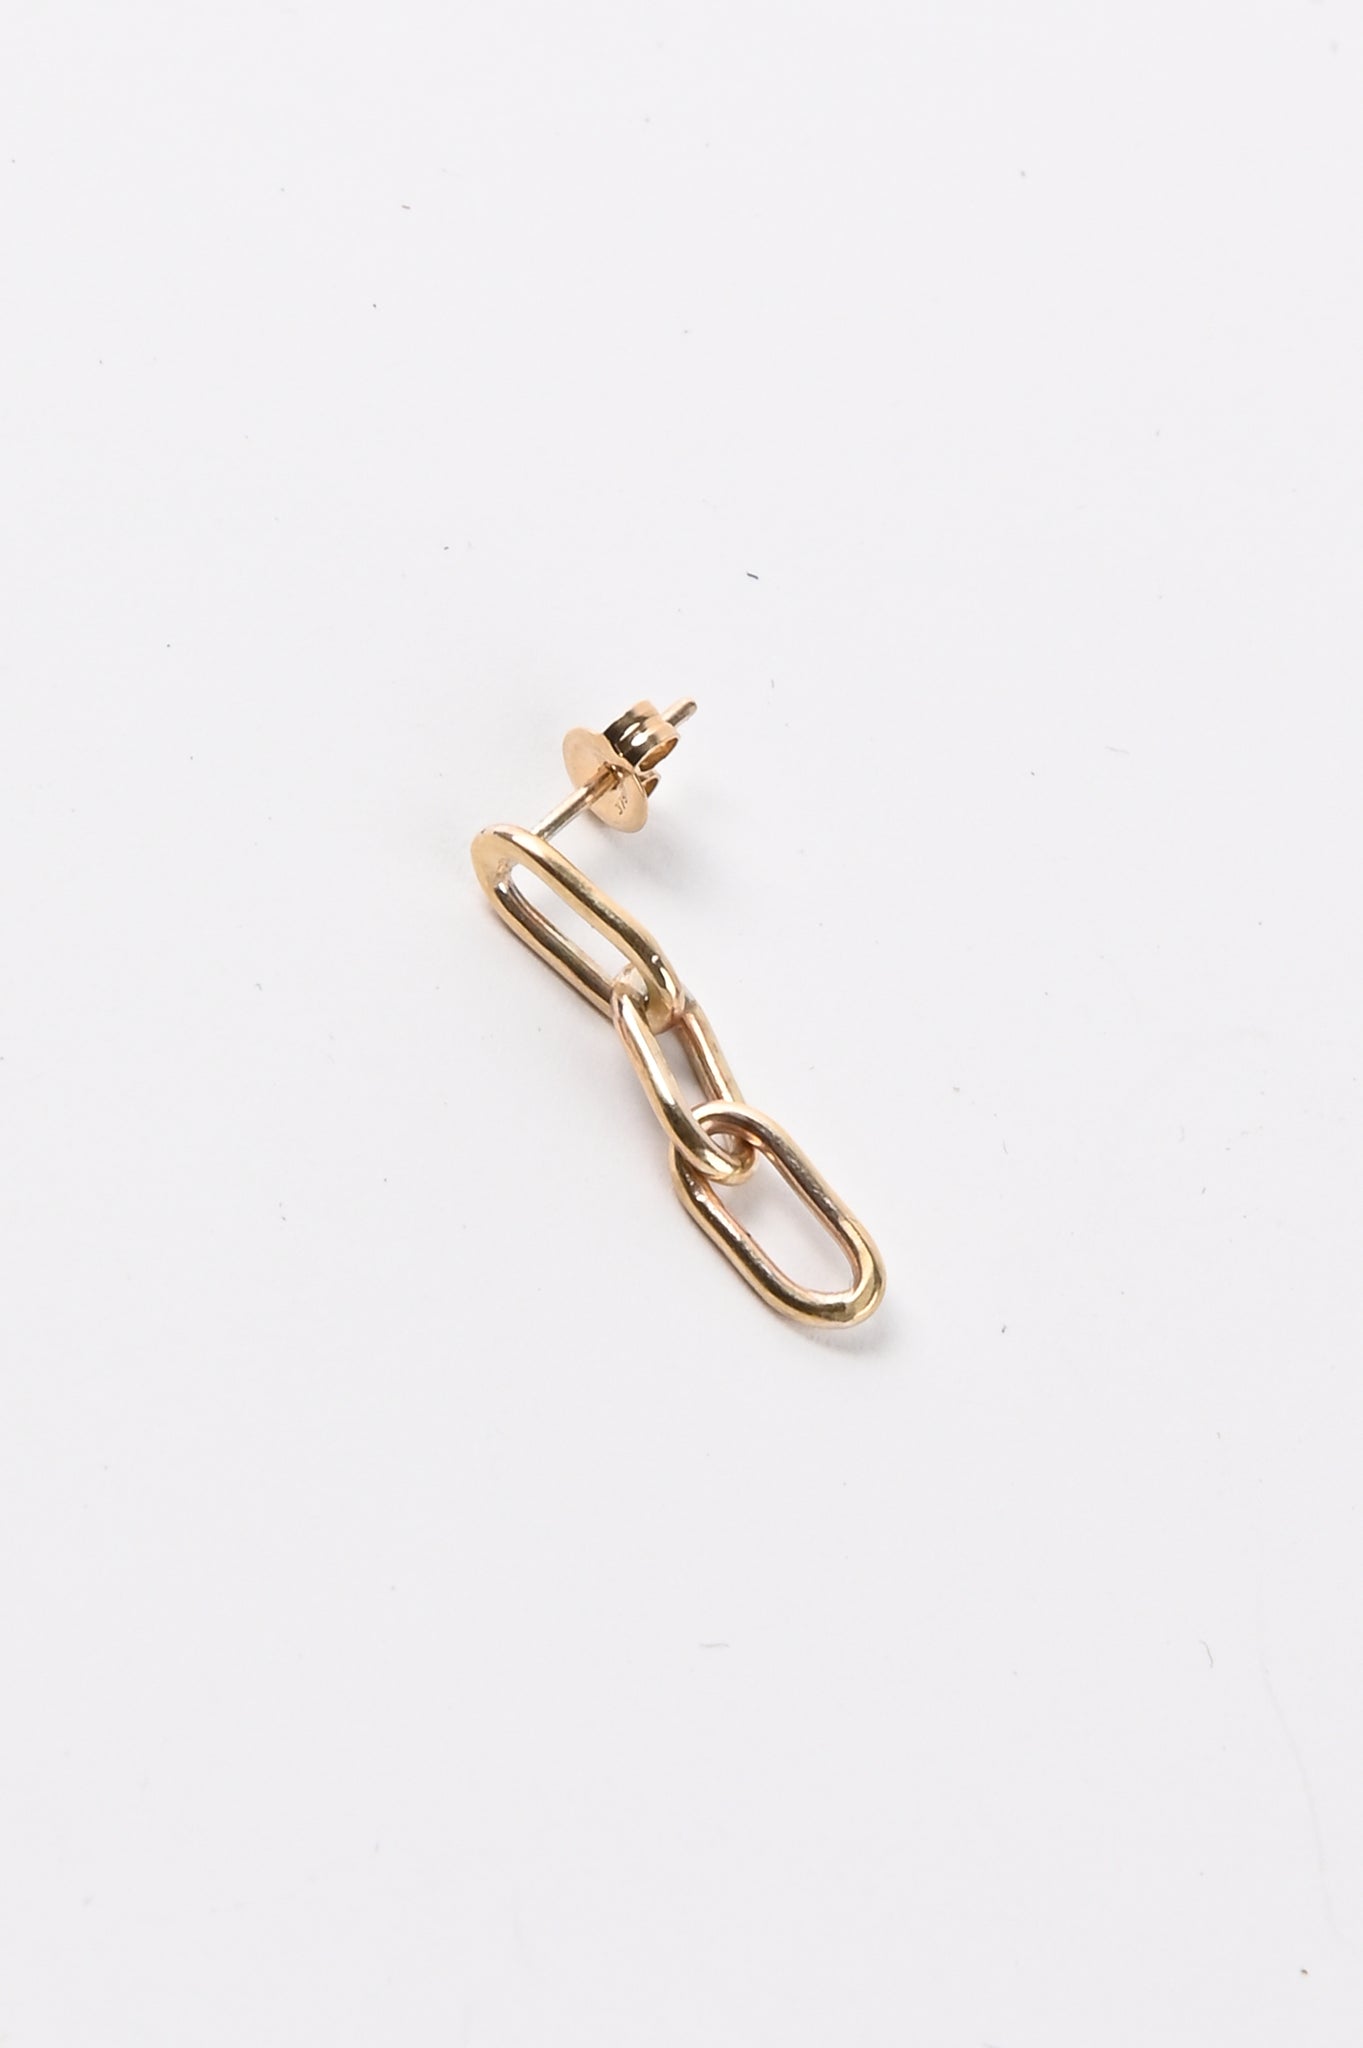 Kick In The Eye 'Original Chain' 3 Link Earring In 9ct Gold